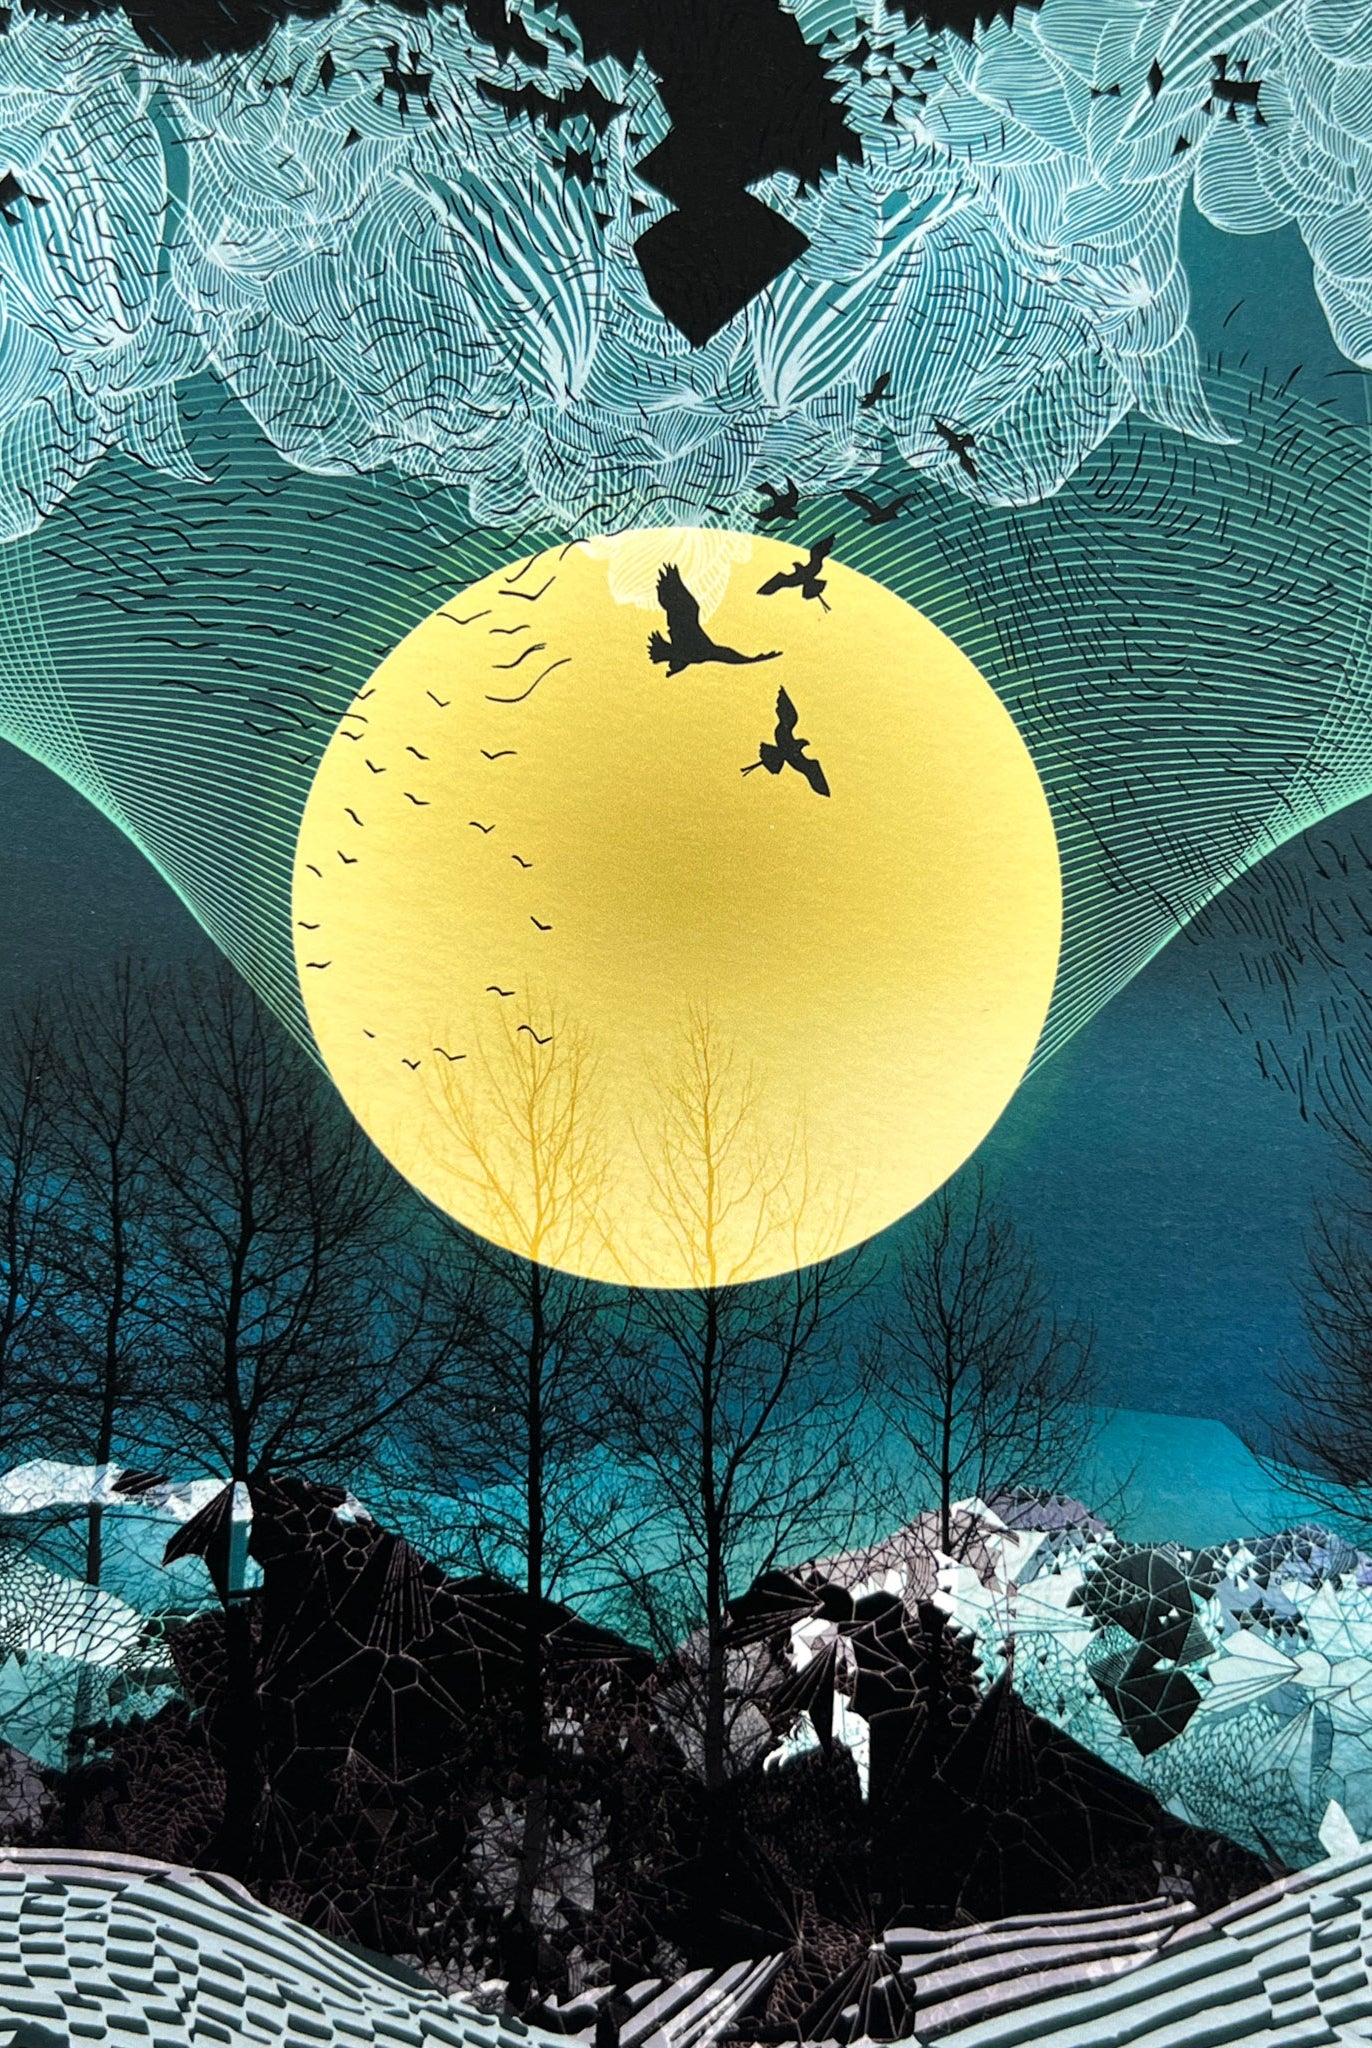 A close up of a giclee print of a large yellow moon, birds and a blue landscapes design